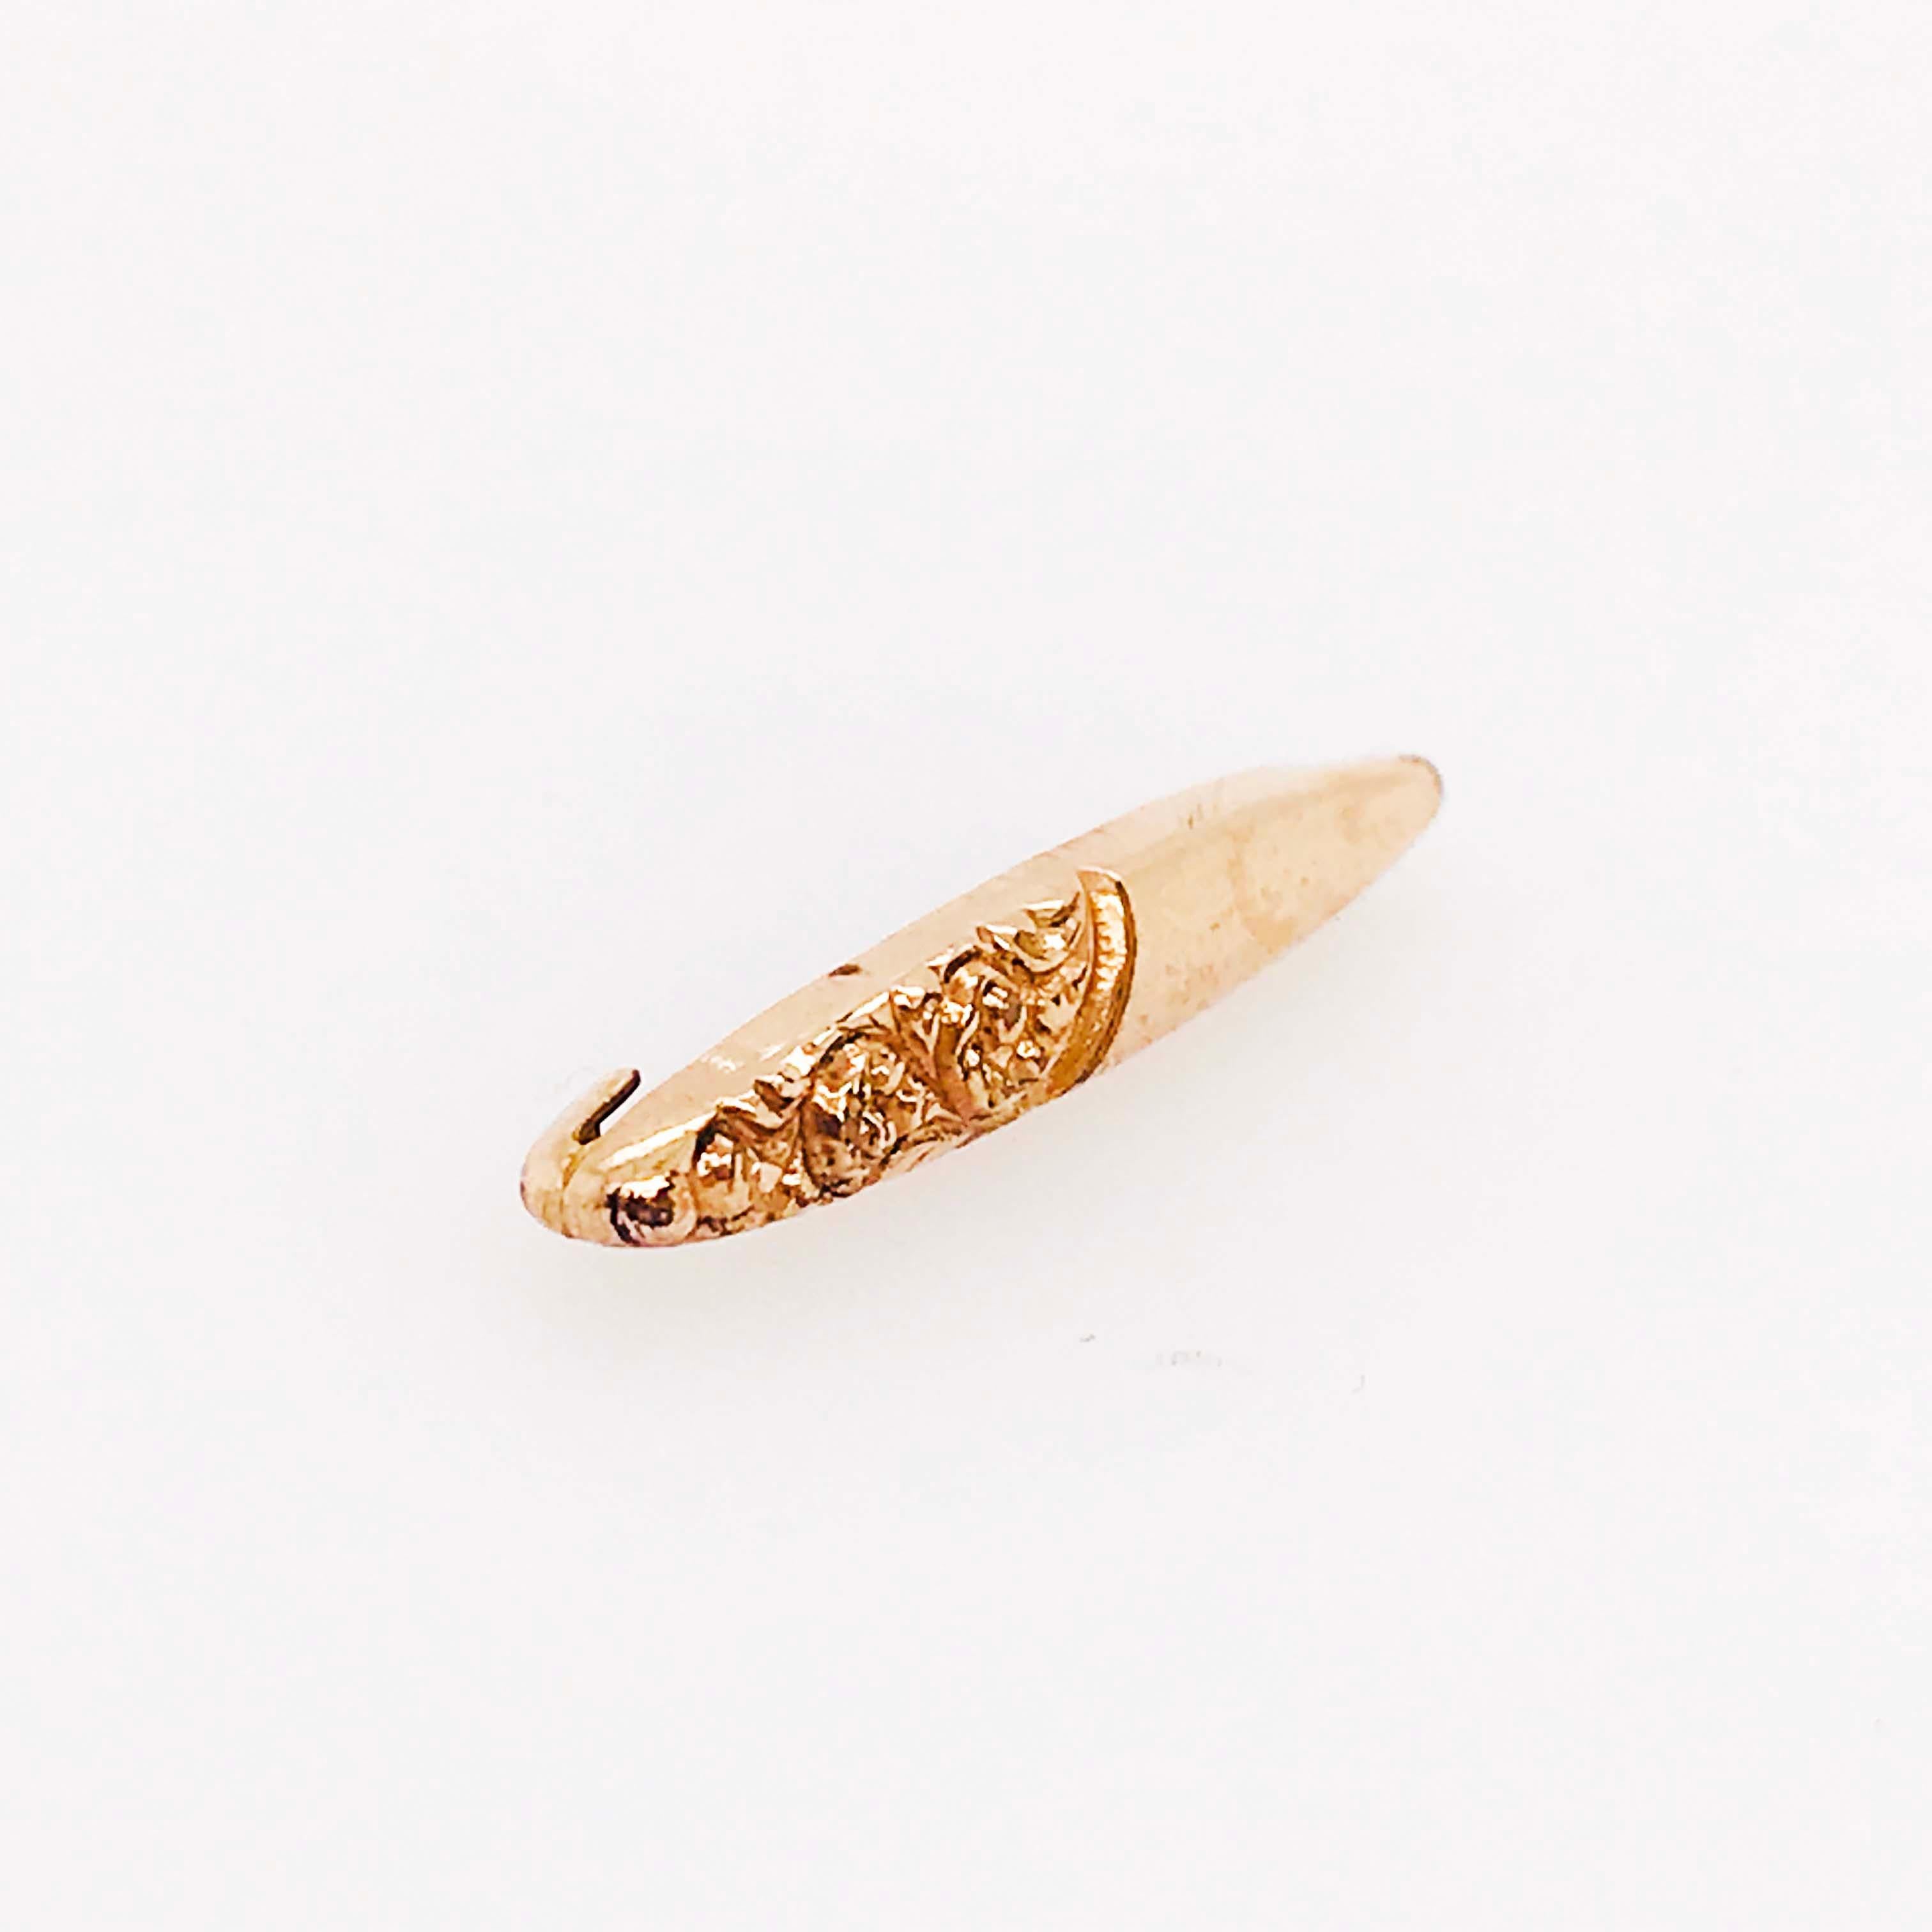 Women's or Men's Rose Scroll Pin, Scroll, Rose Gold Brooch with Hand Engraving, circa 1910